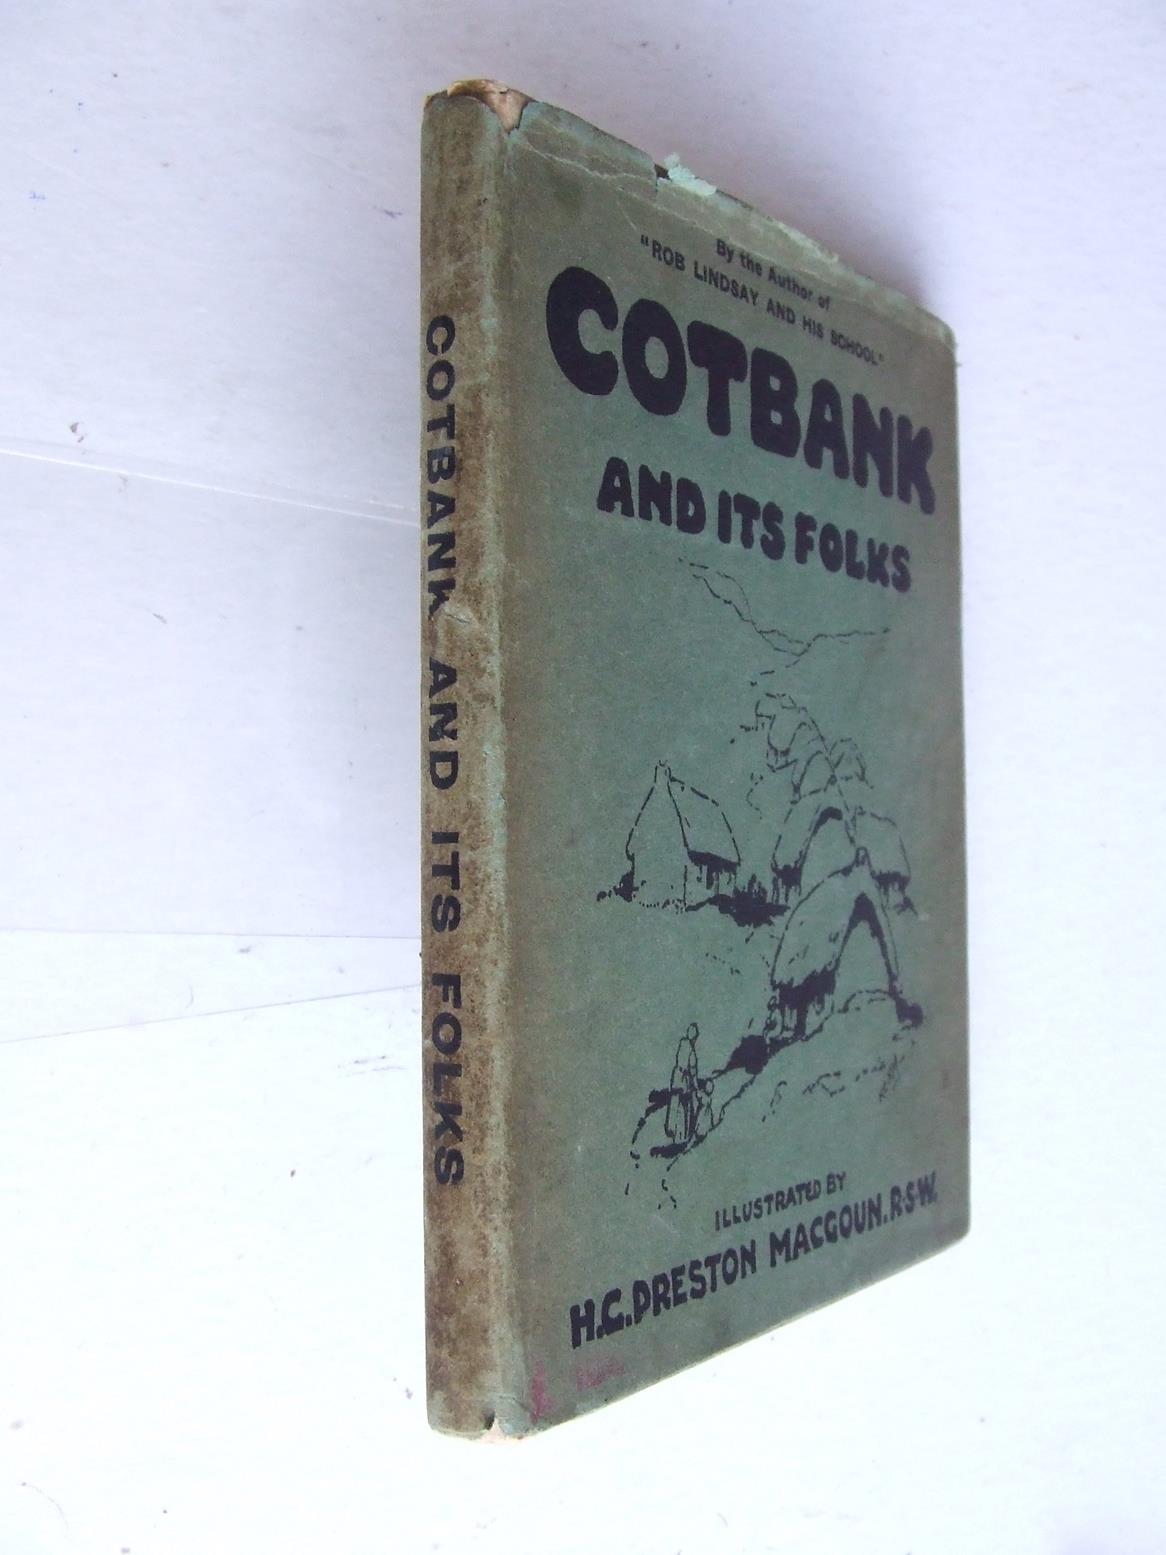 Cotbank and its Folks